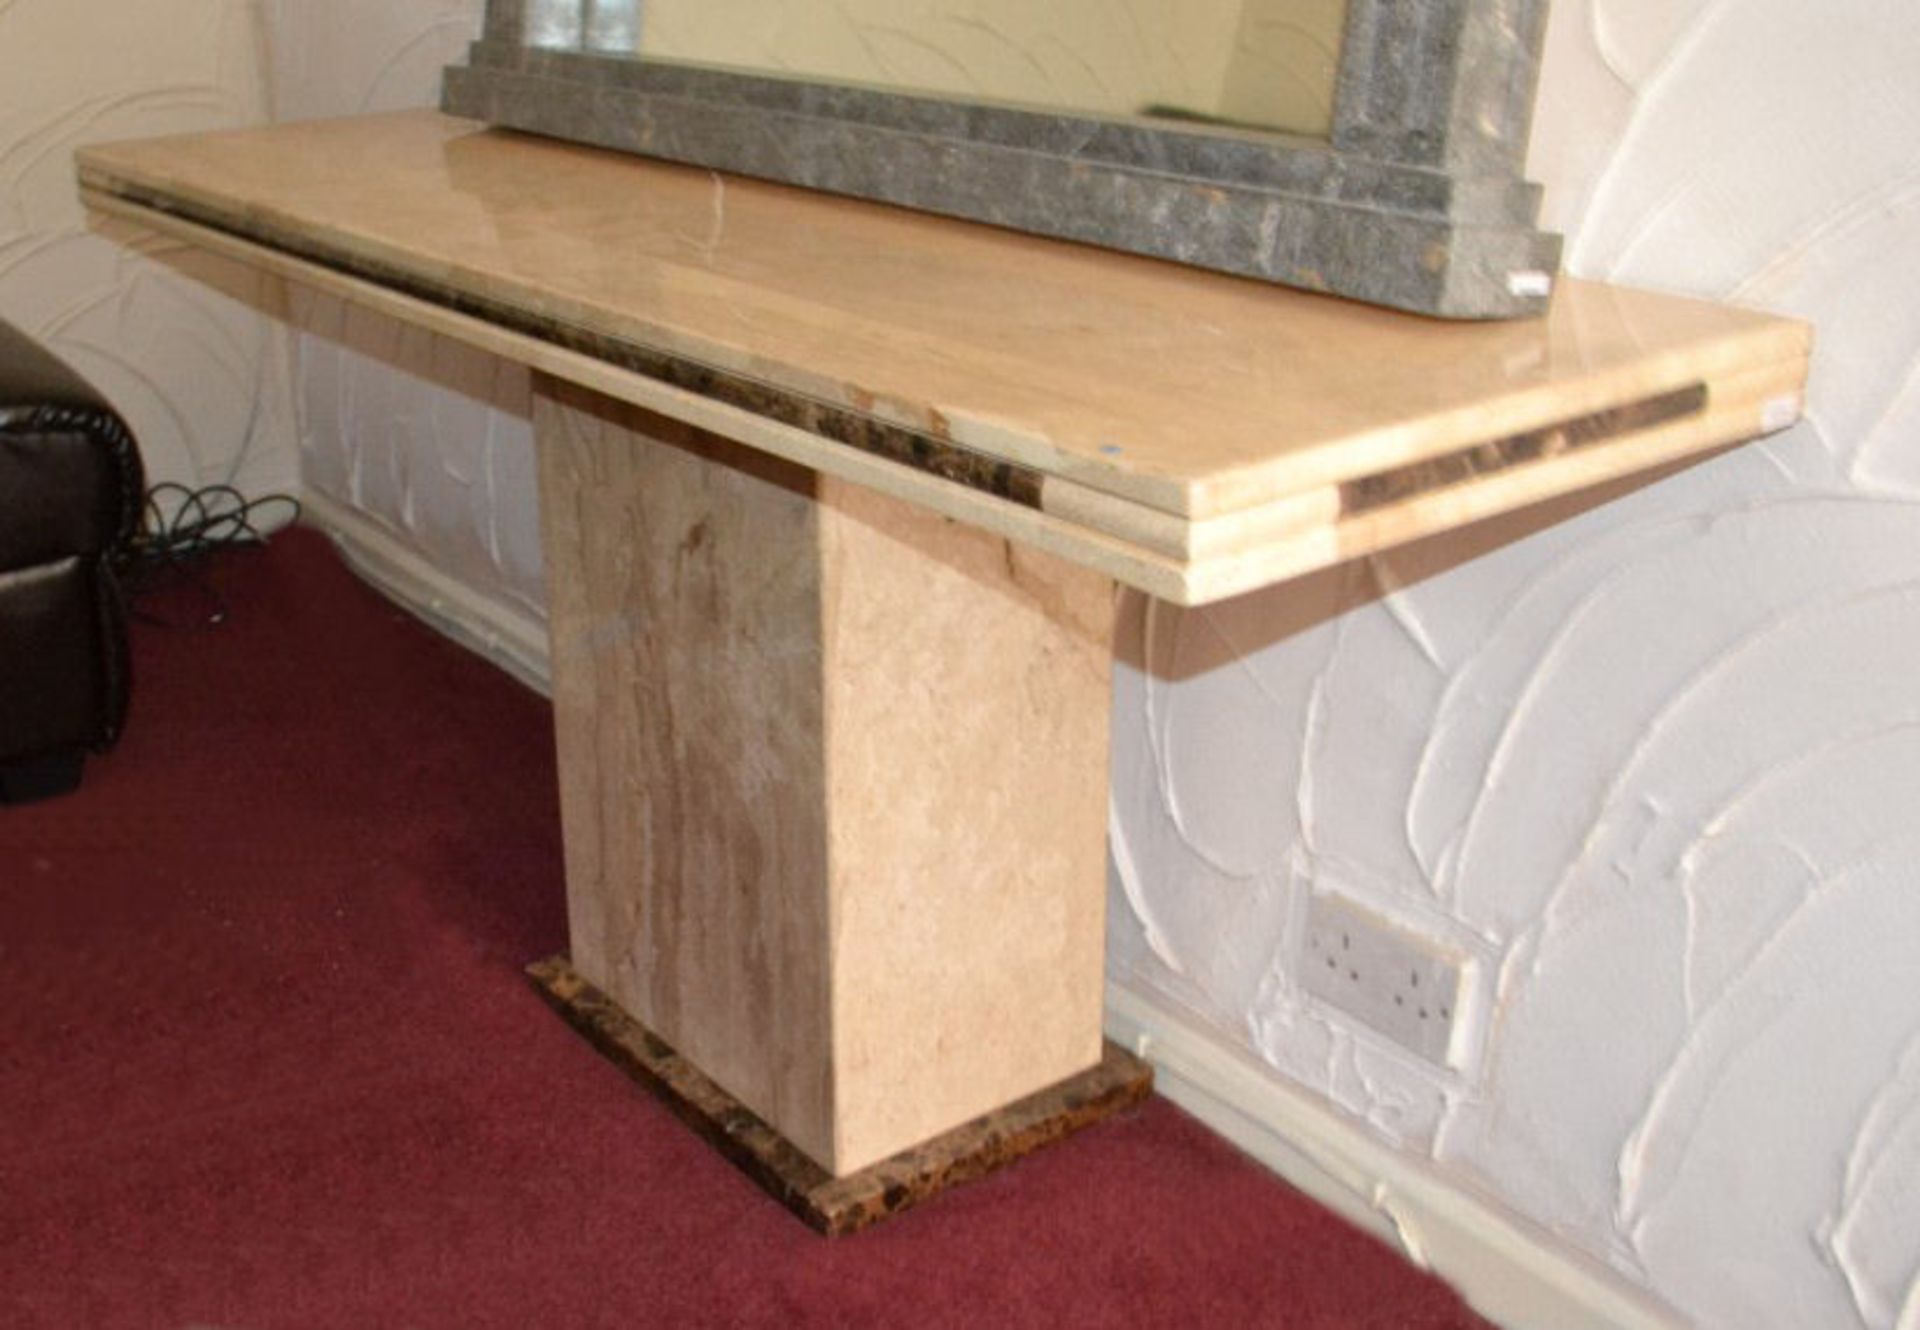 1 x Cream Marble Console Table with Chocolate Brown Edge Strip